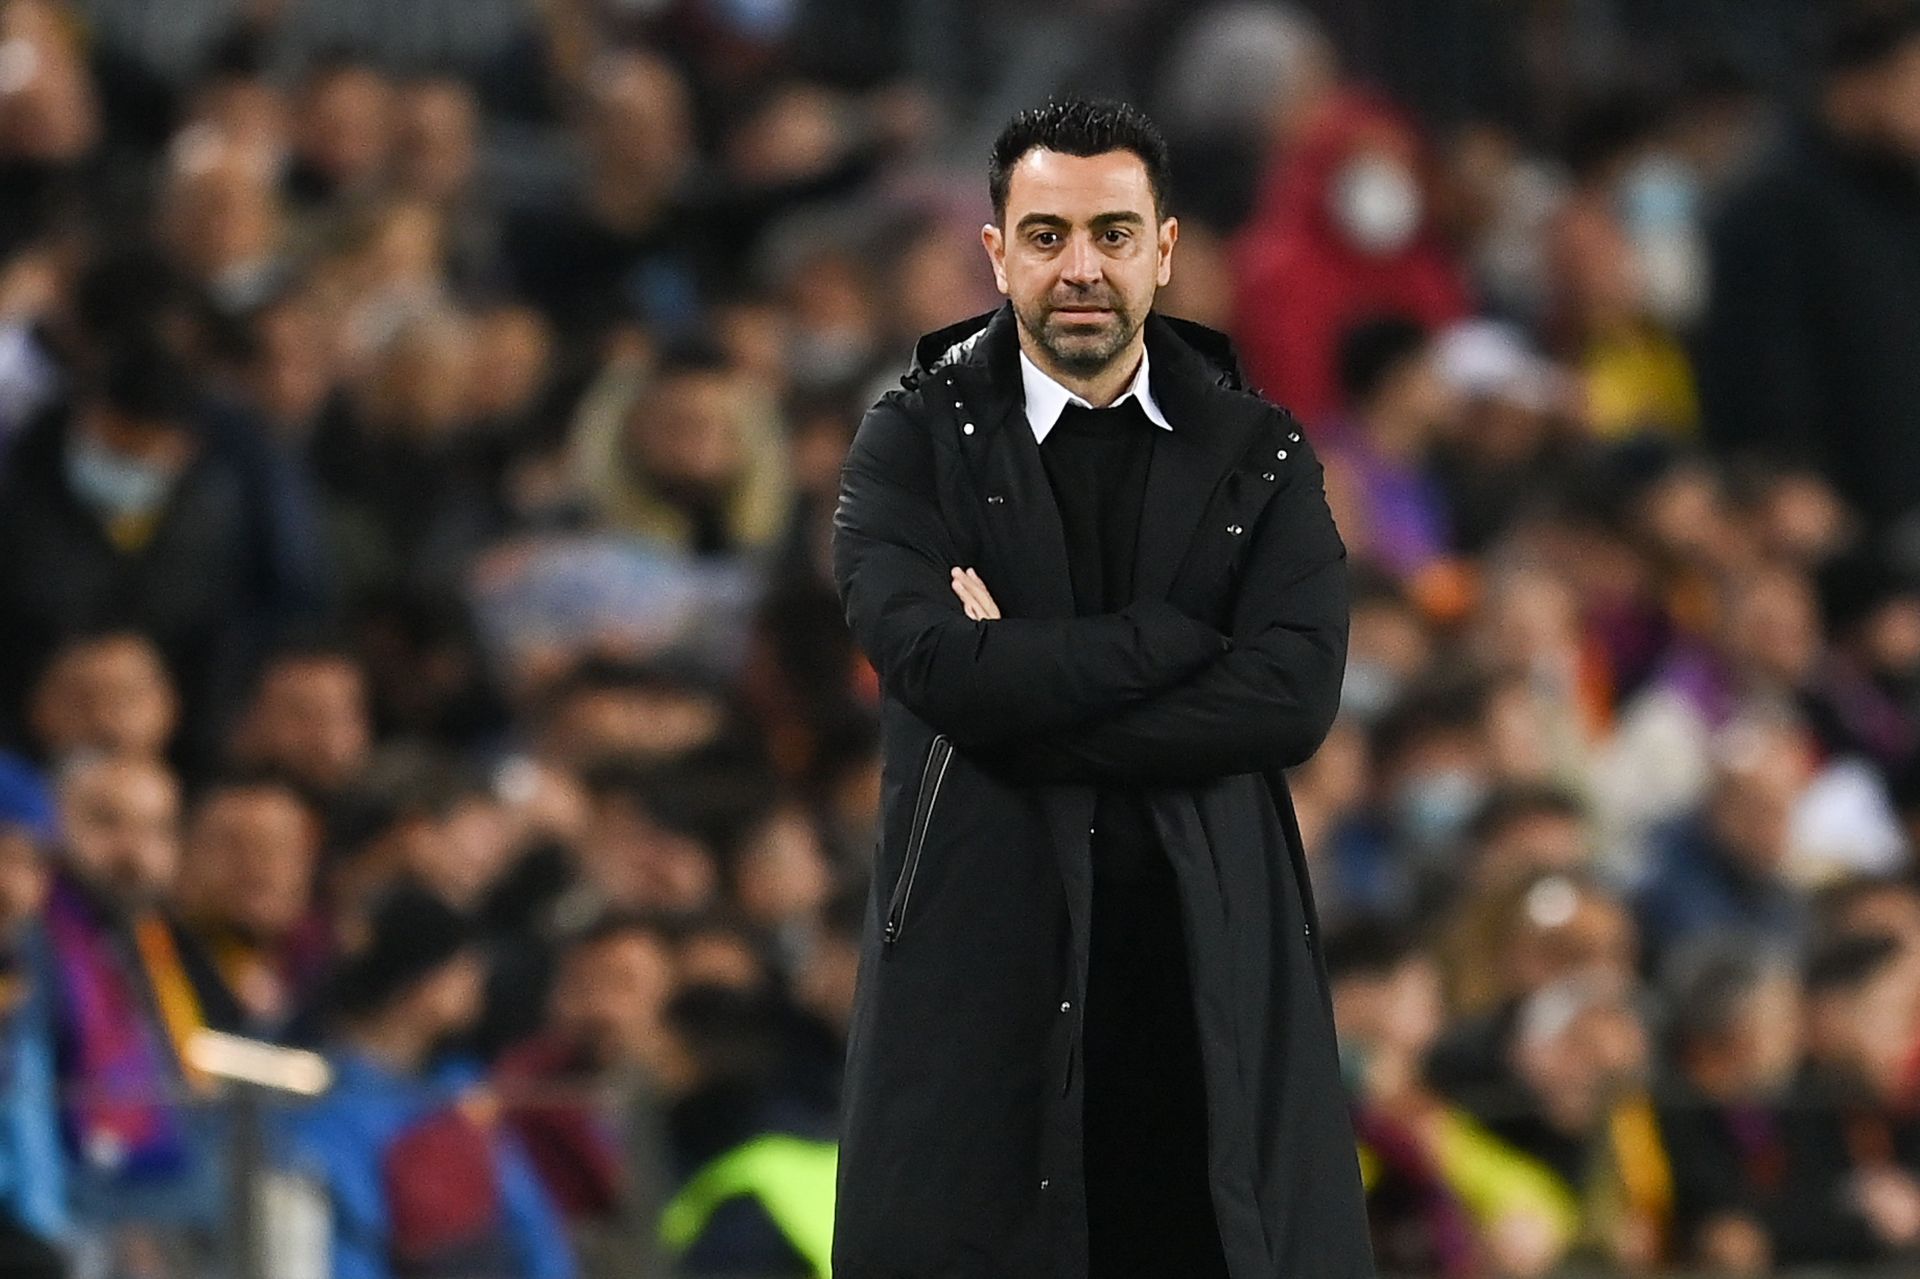 Barcelona manager Xavi has his eye on a top-four finish